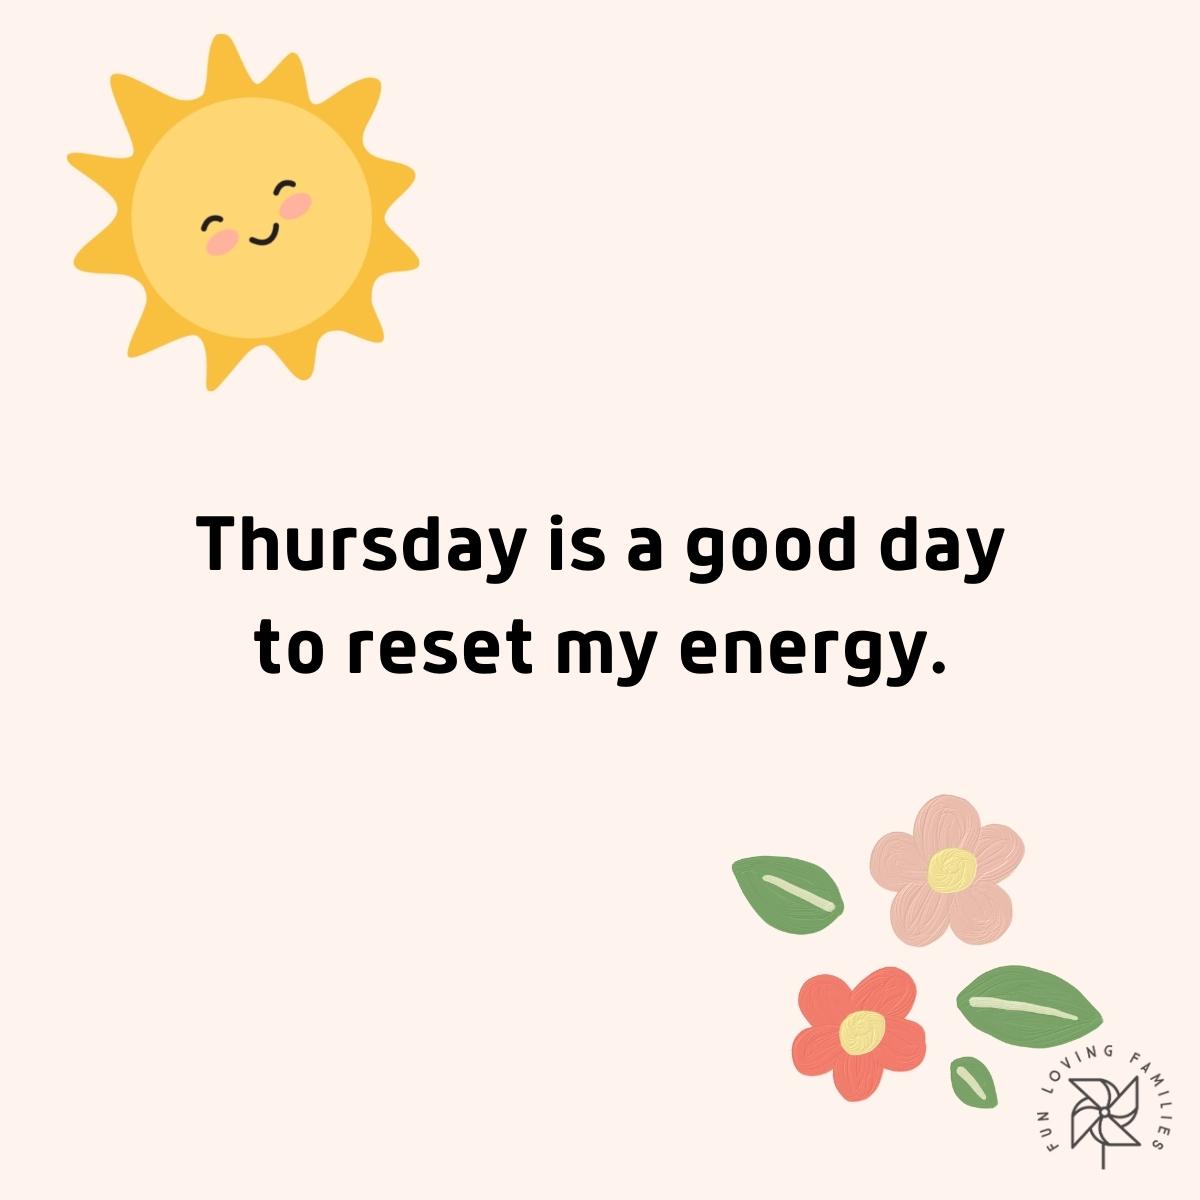 Thursday is a good day to reset my energy affirmation